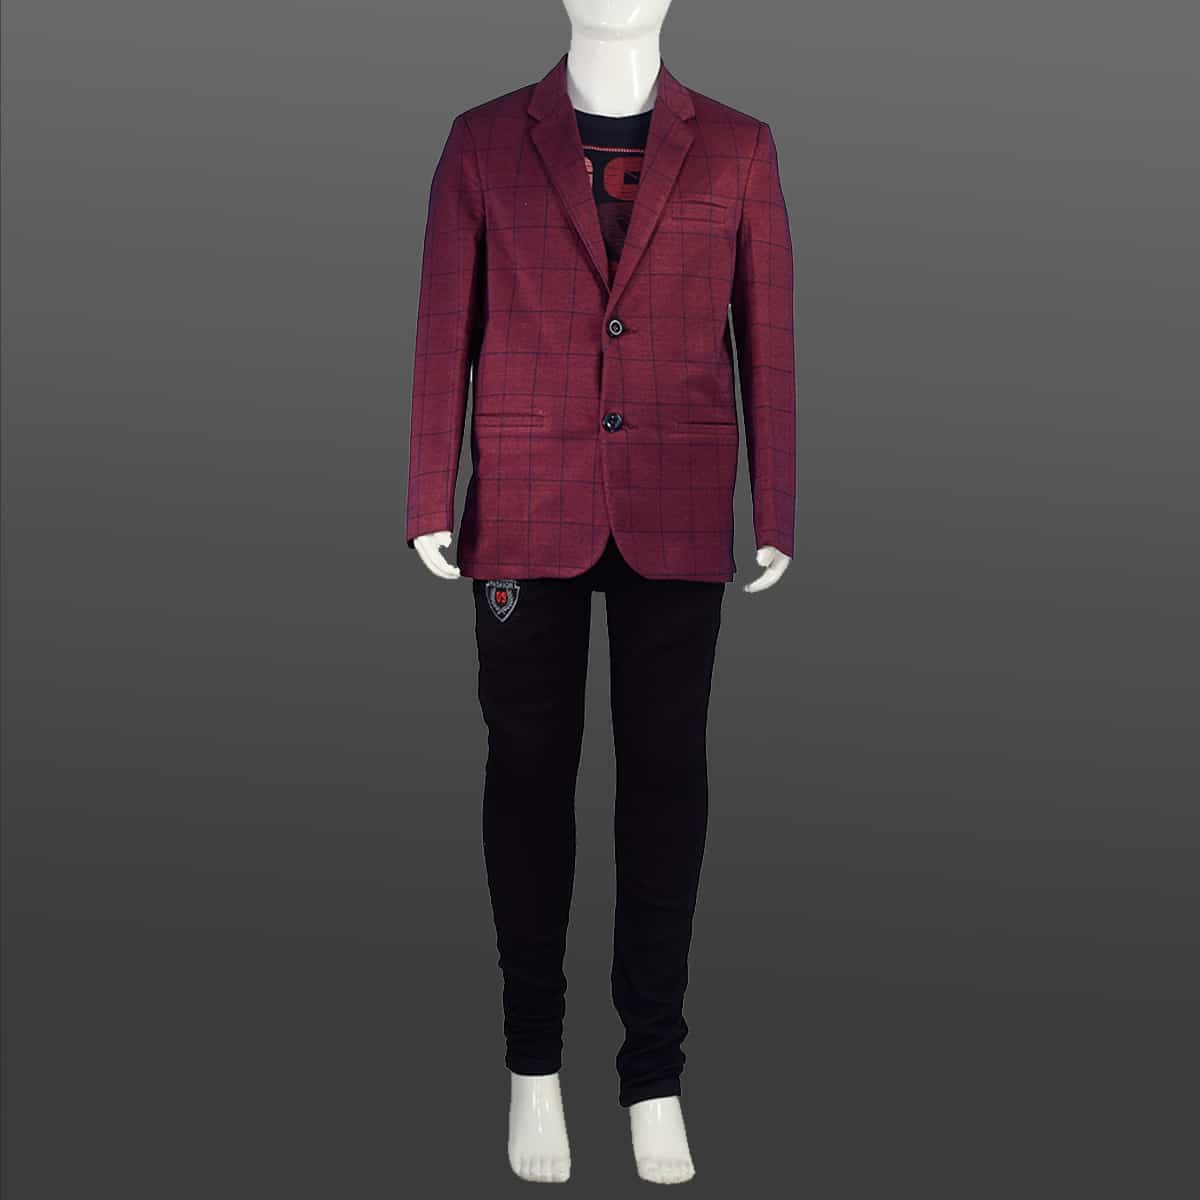 What color pants and tie should I wear with a wine colored shirt  Quora